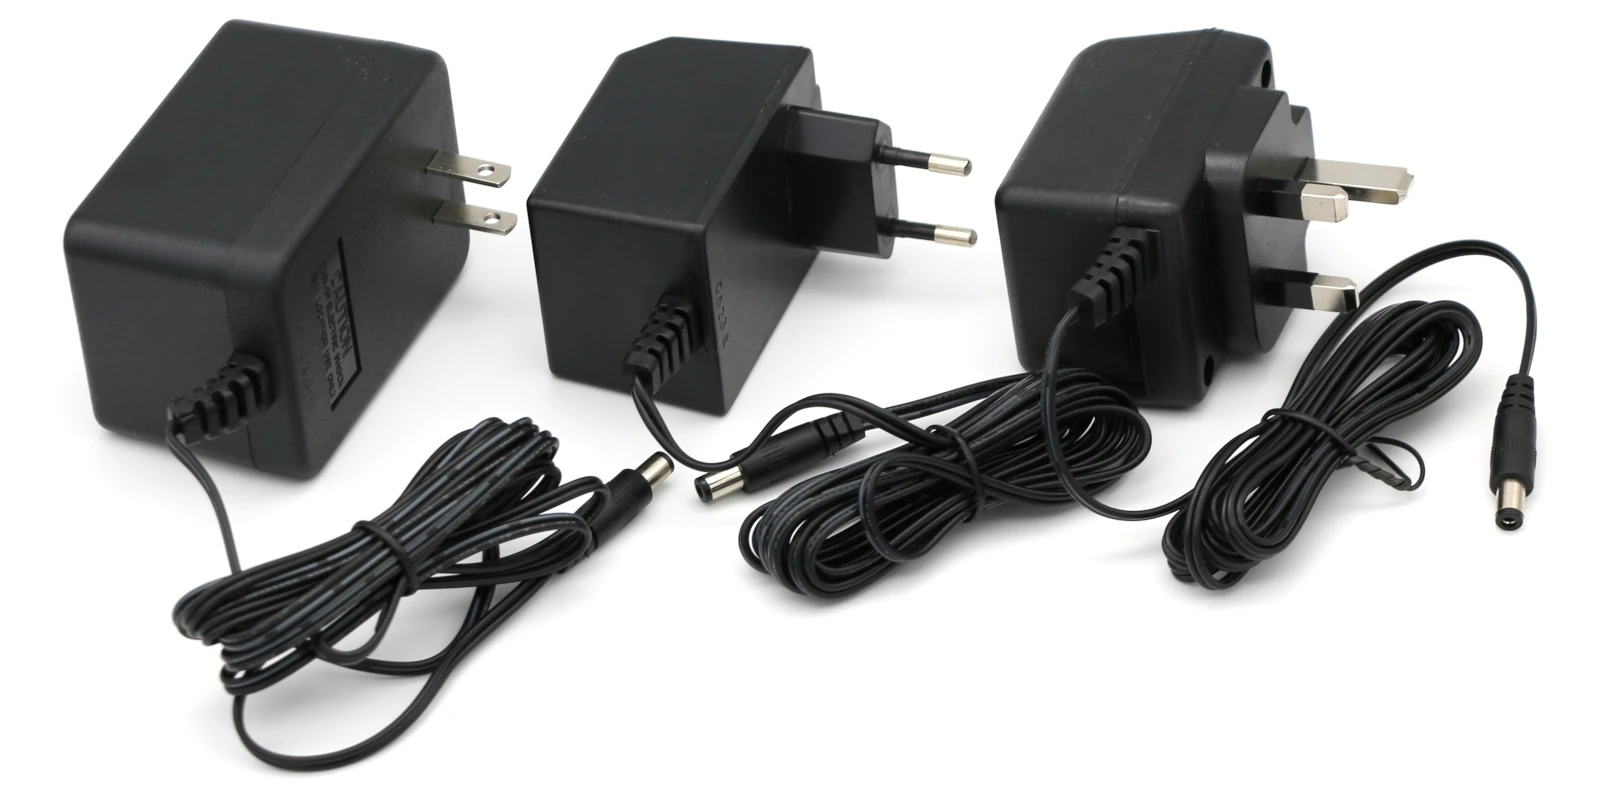 US, EU, and UK power adapters